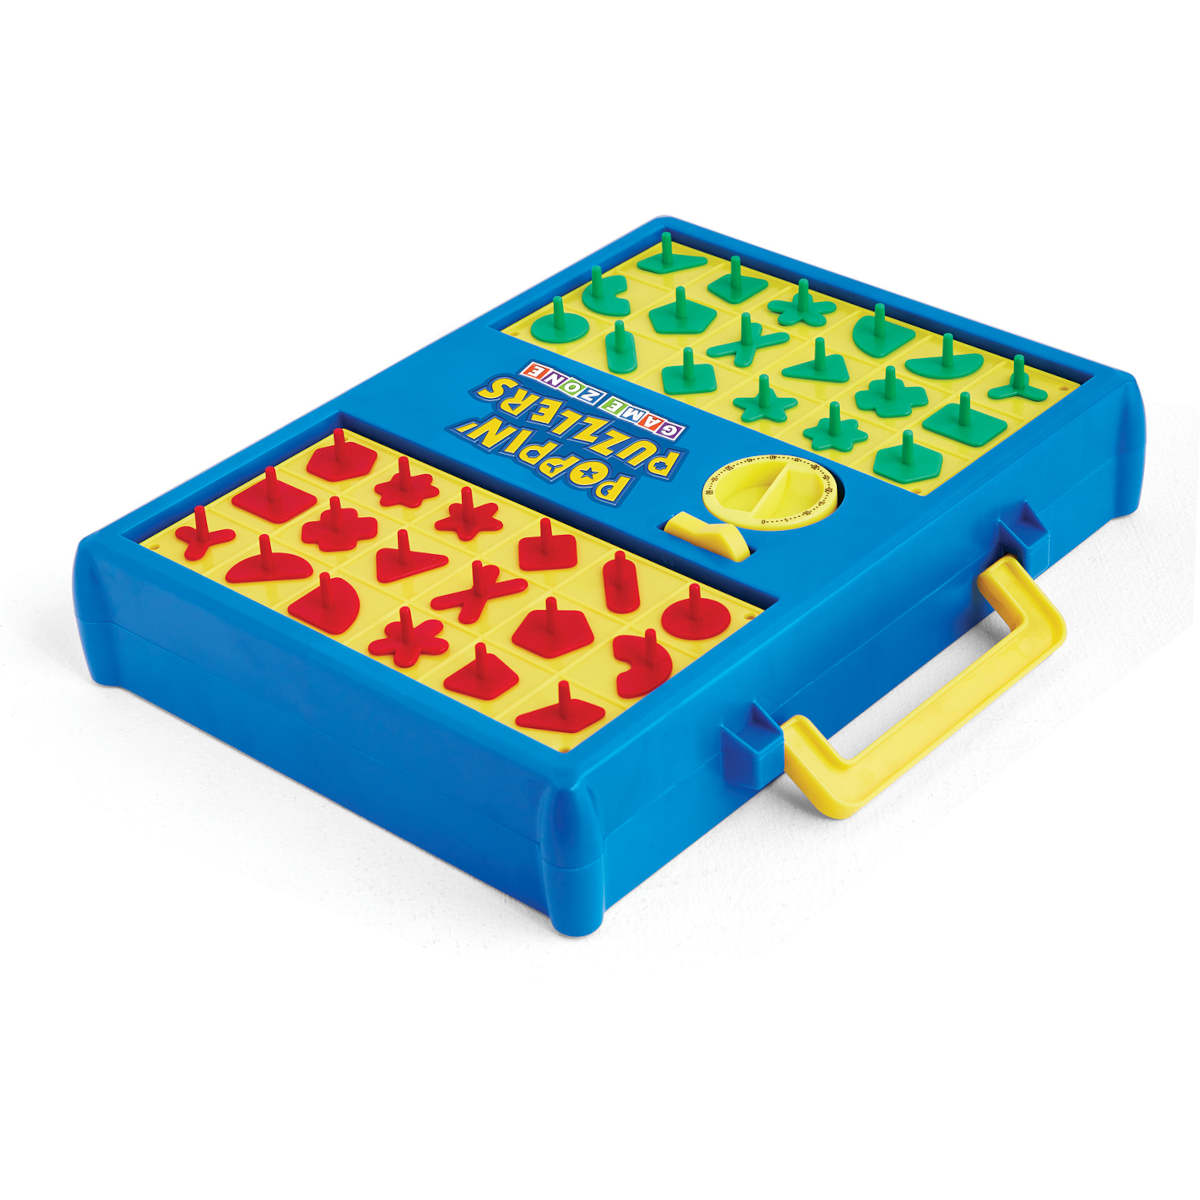 Poppin’ Puzzlers Game